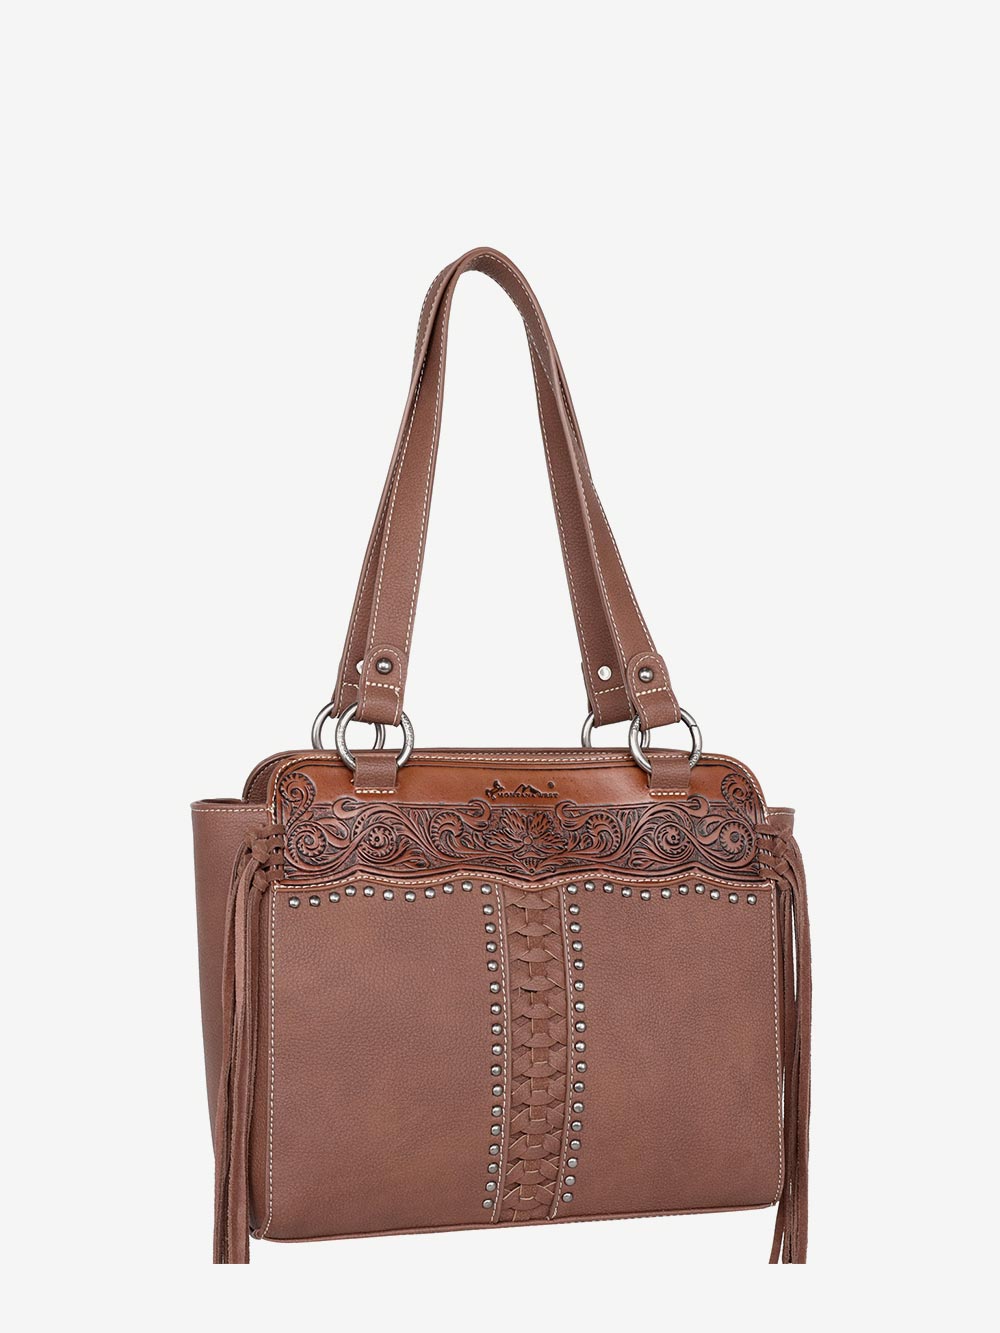 Montana West Tooling Floral Embossed Concealed Carry Tote - Montana West World